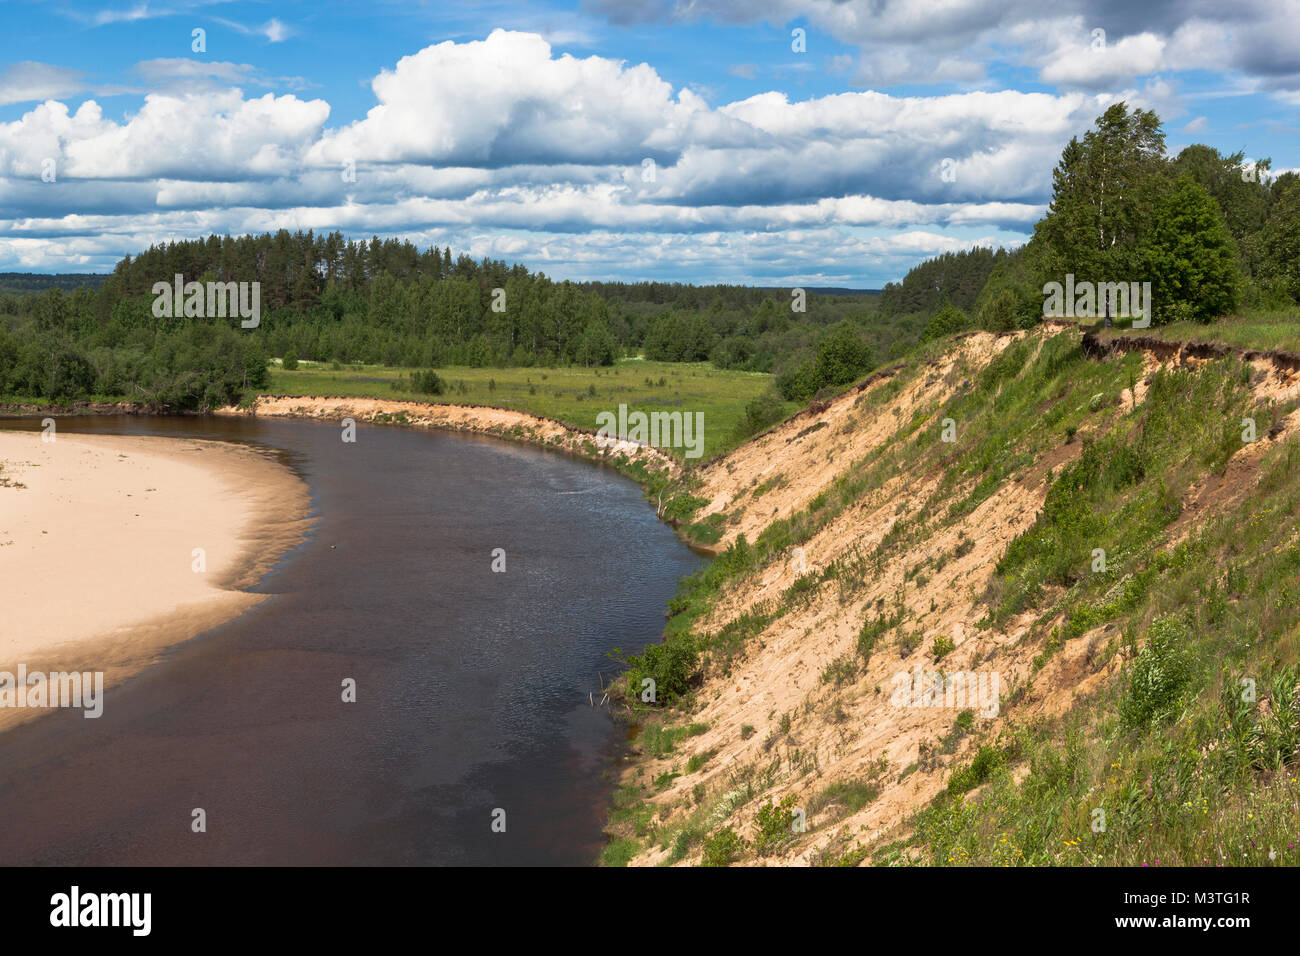 Steep bank rivers Vaga. River View near the village Undercity, Velsky district, Arkhangelsk region, Russia Stock Photo